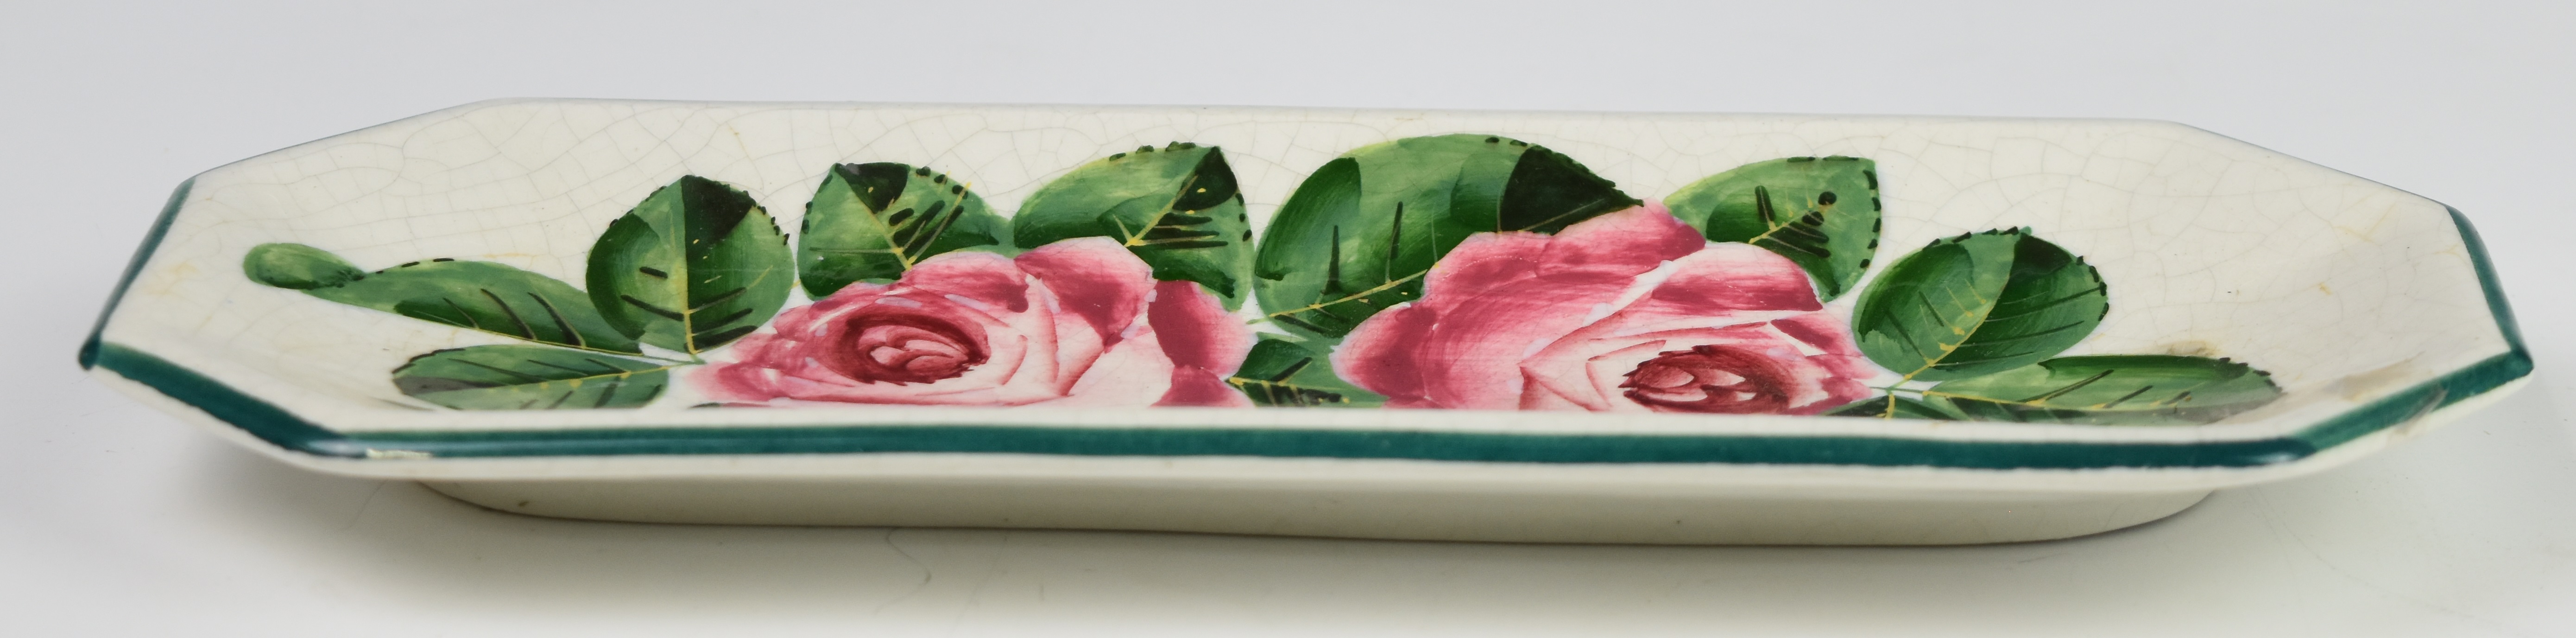 Wemyss pen tray decorated with roses, impressed and printed marks to base, 25 x 9.5cm - Image 2 of 3